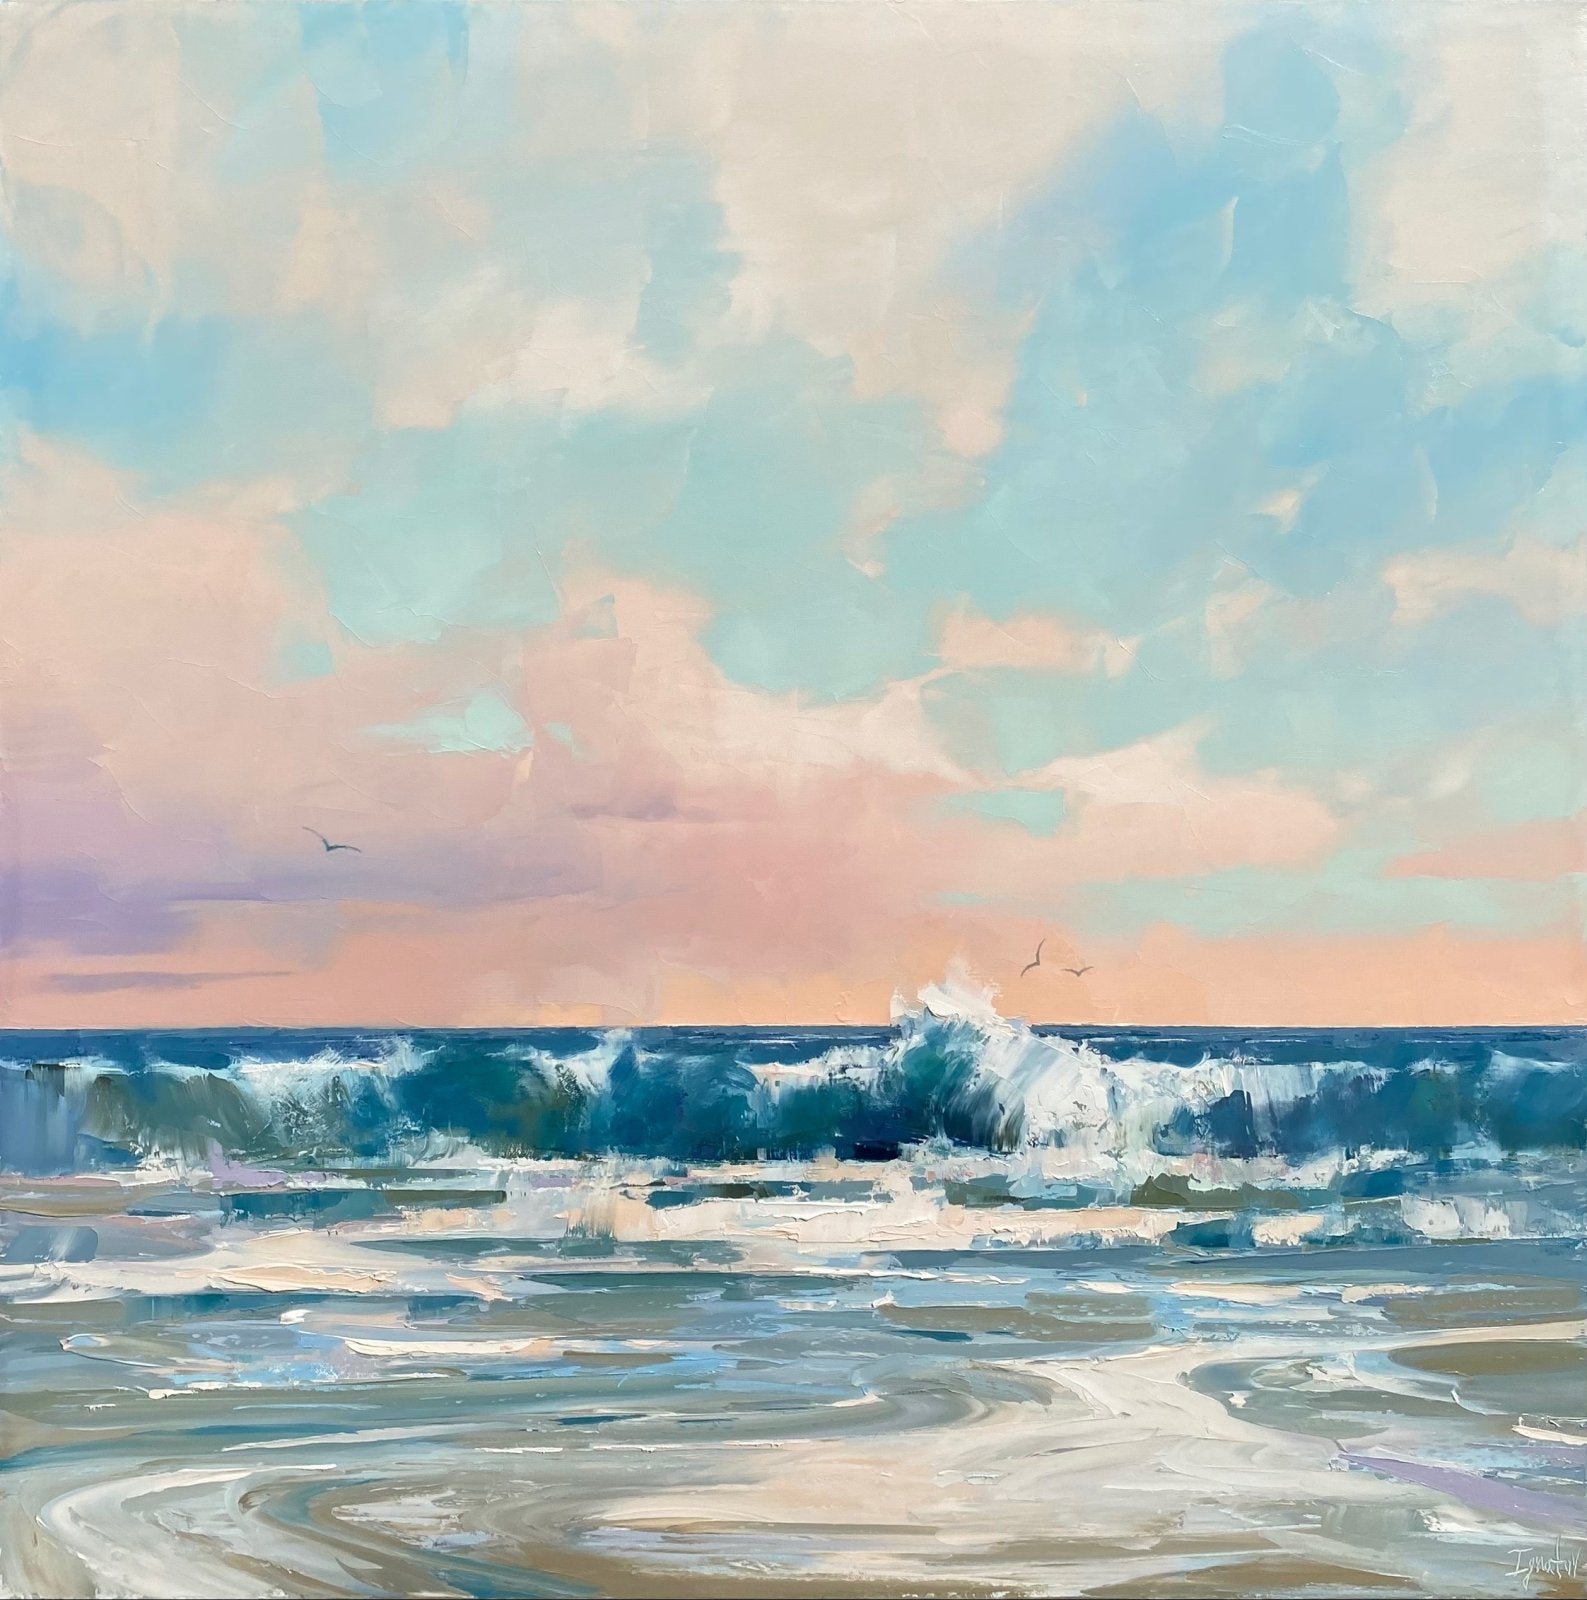 Morning Seascape by Ignat Ignatov at LePrince Galleries